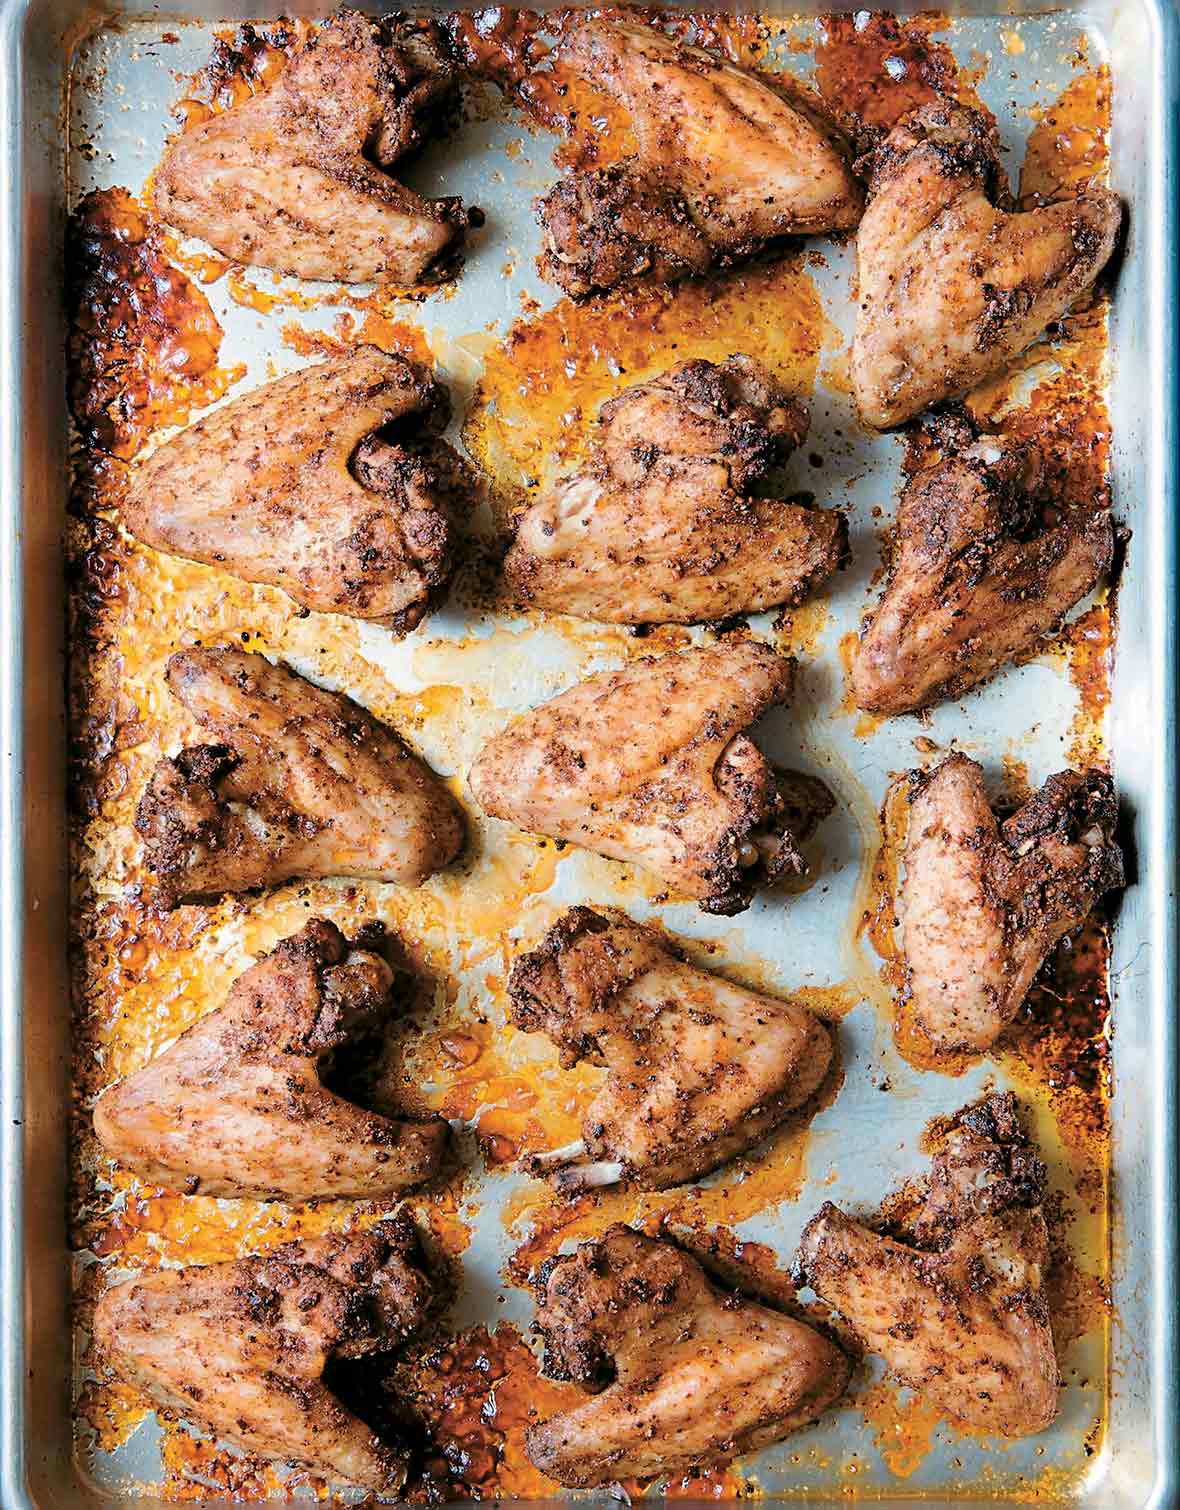 Spiced roasted chicken wings on a rimmed baking sheet.